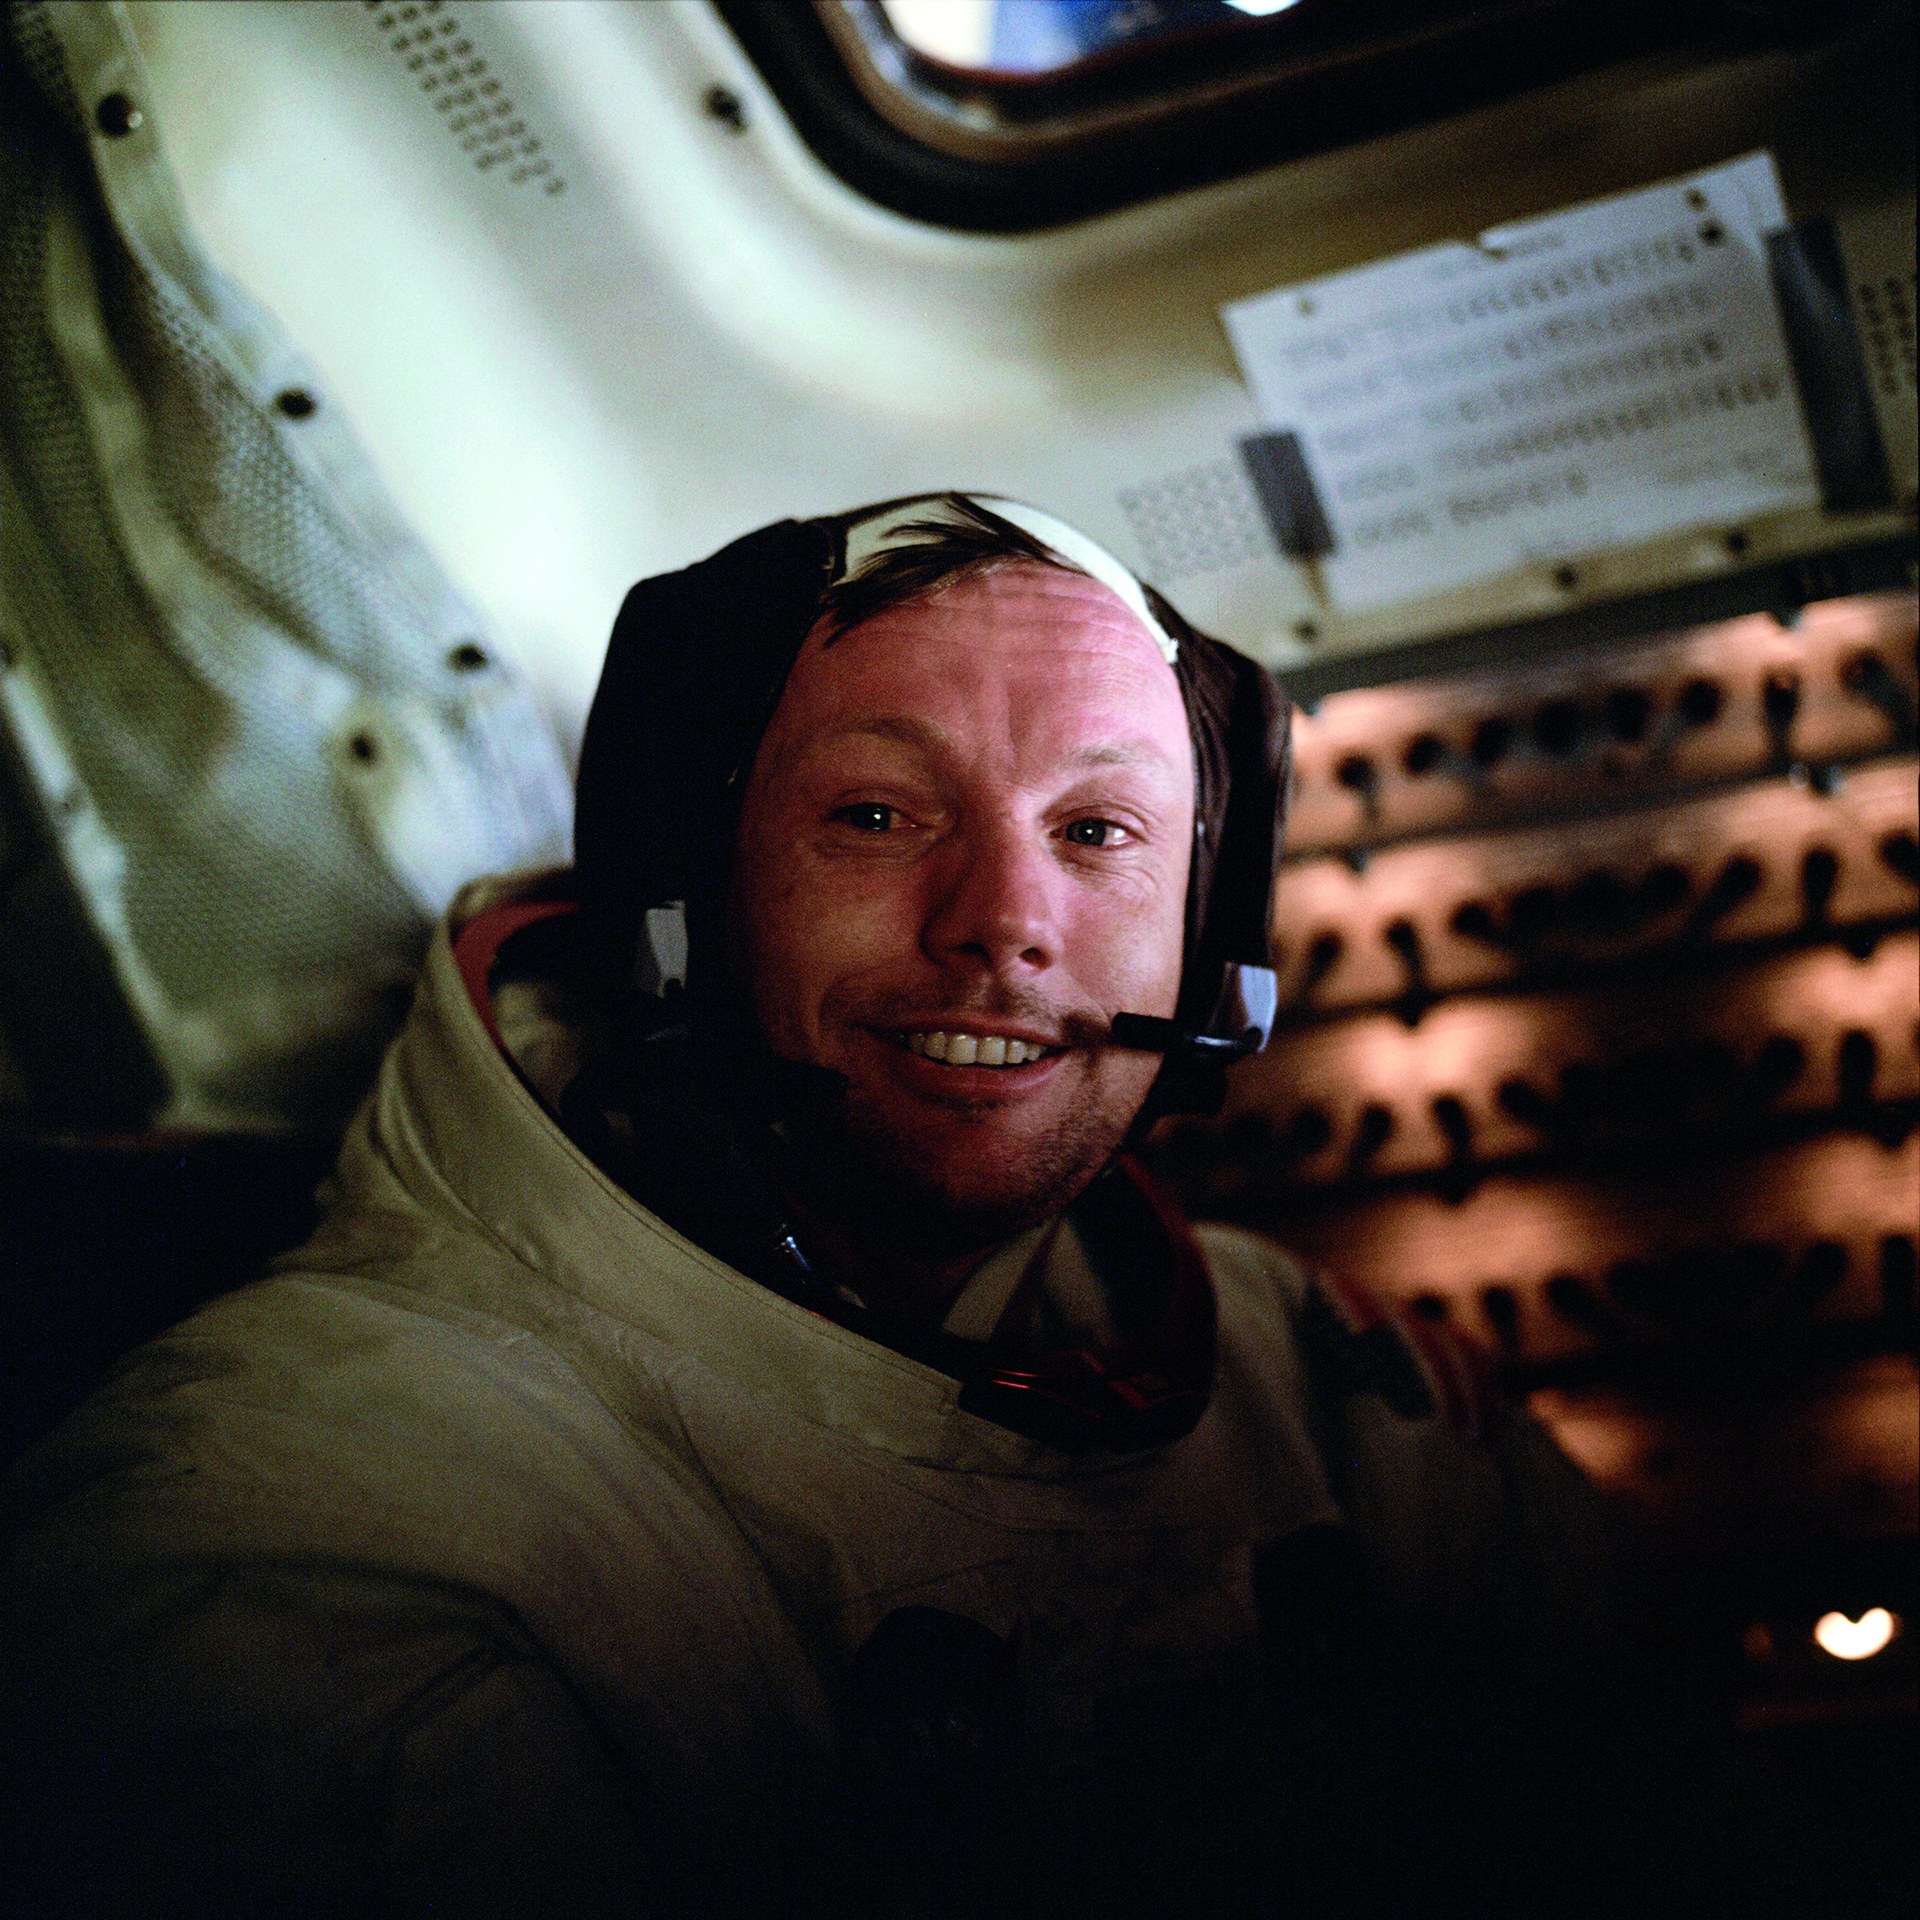 Neil Armstrong, first man on the moon